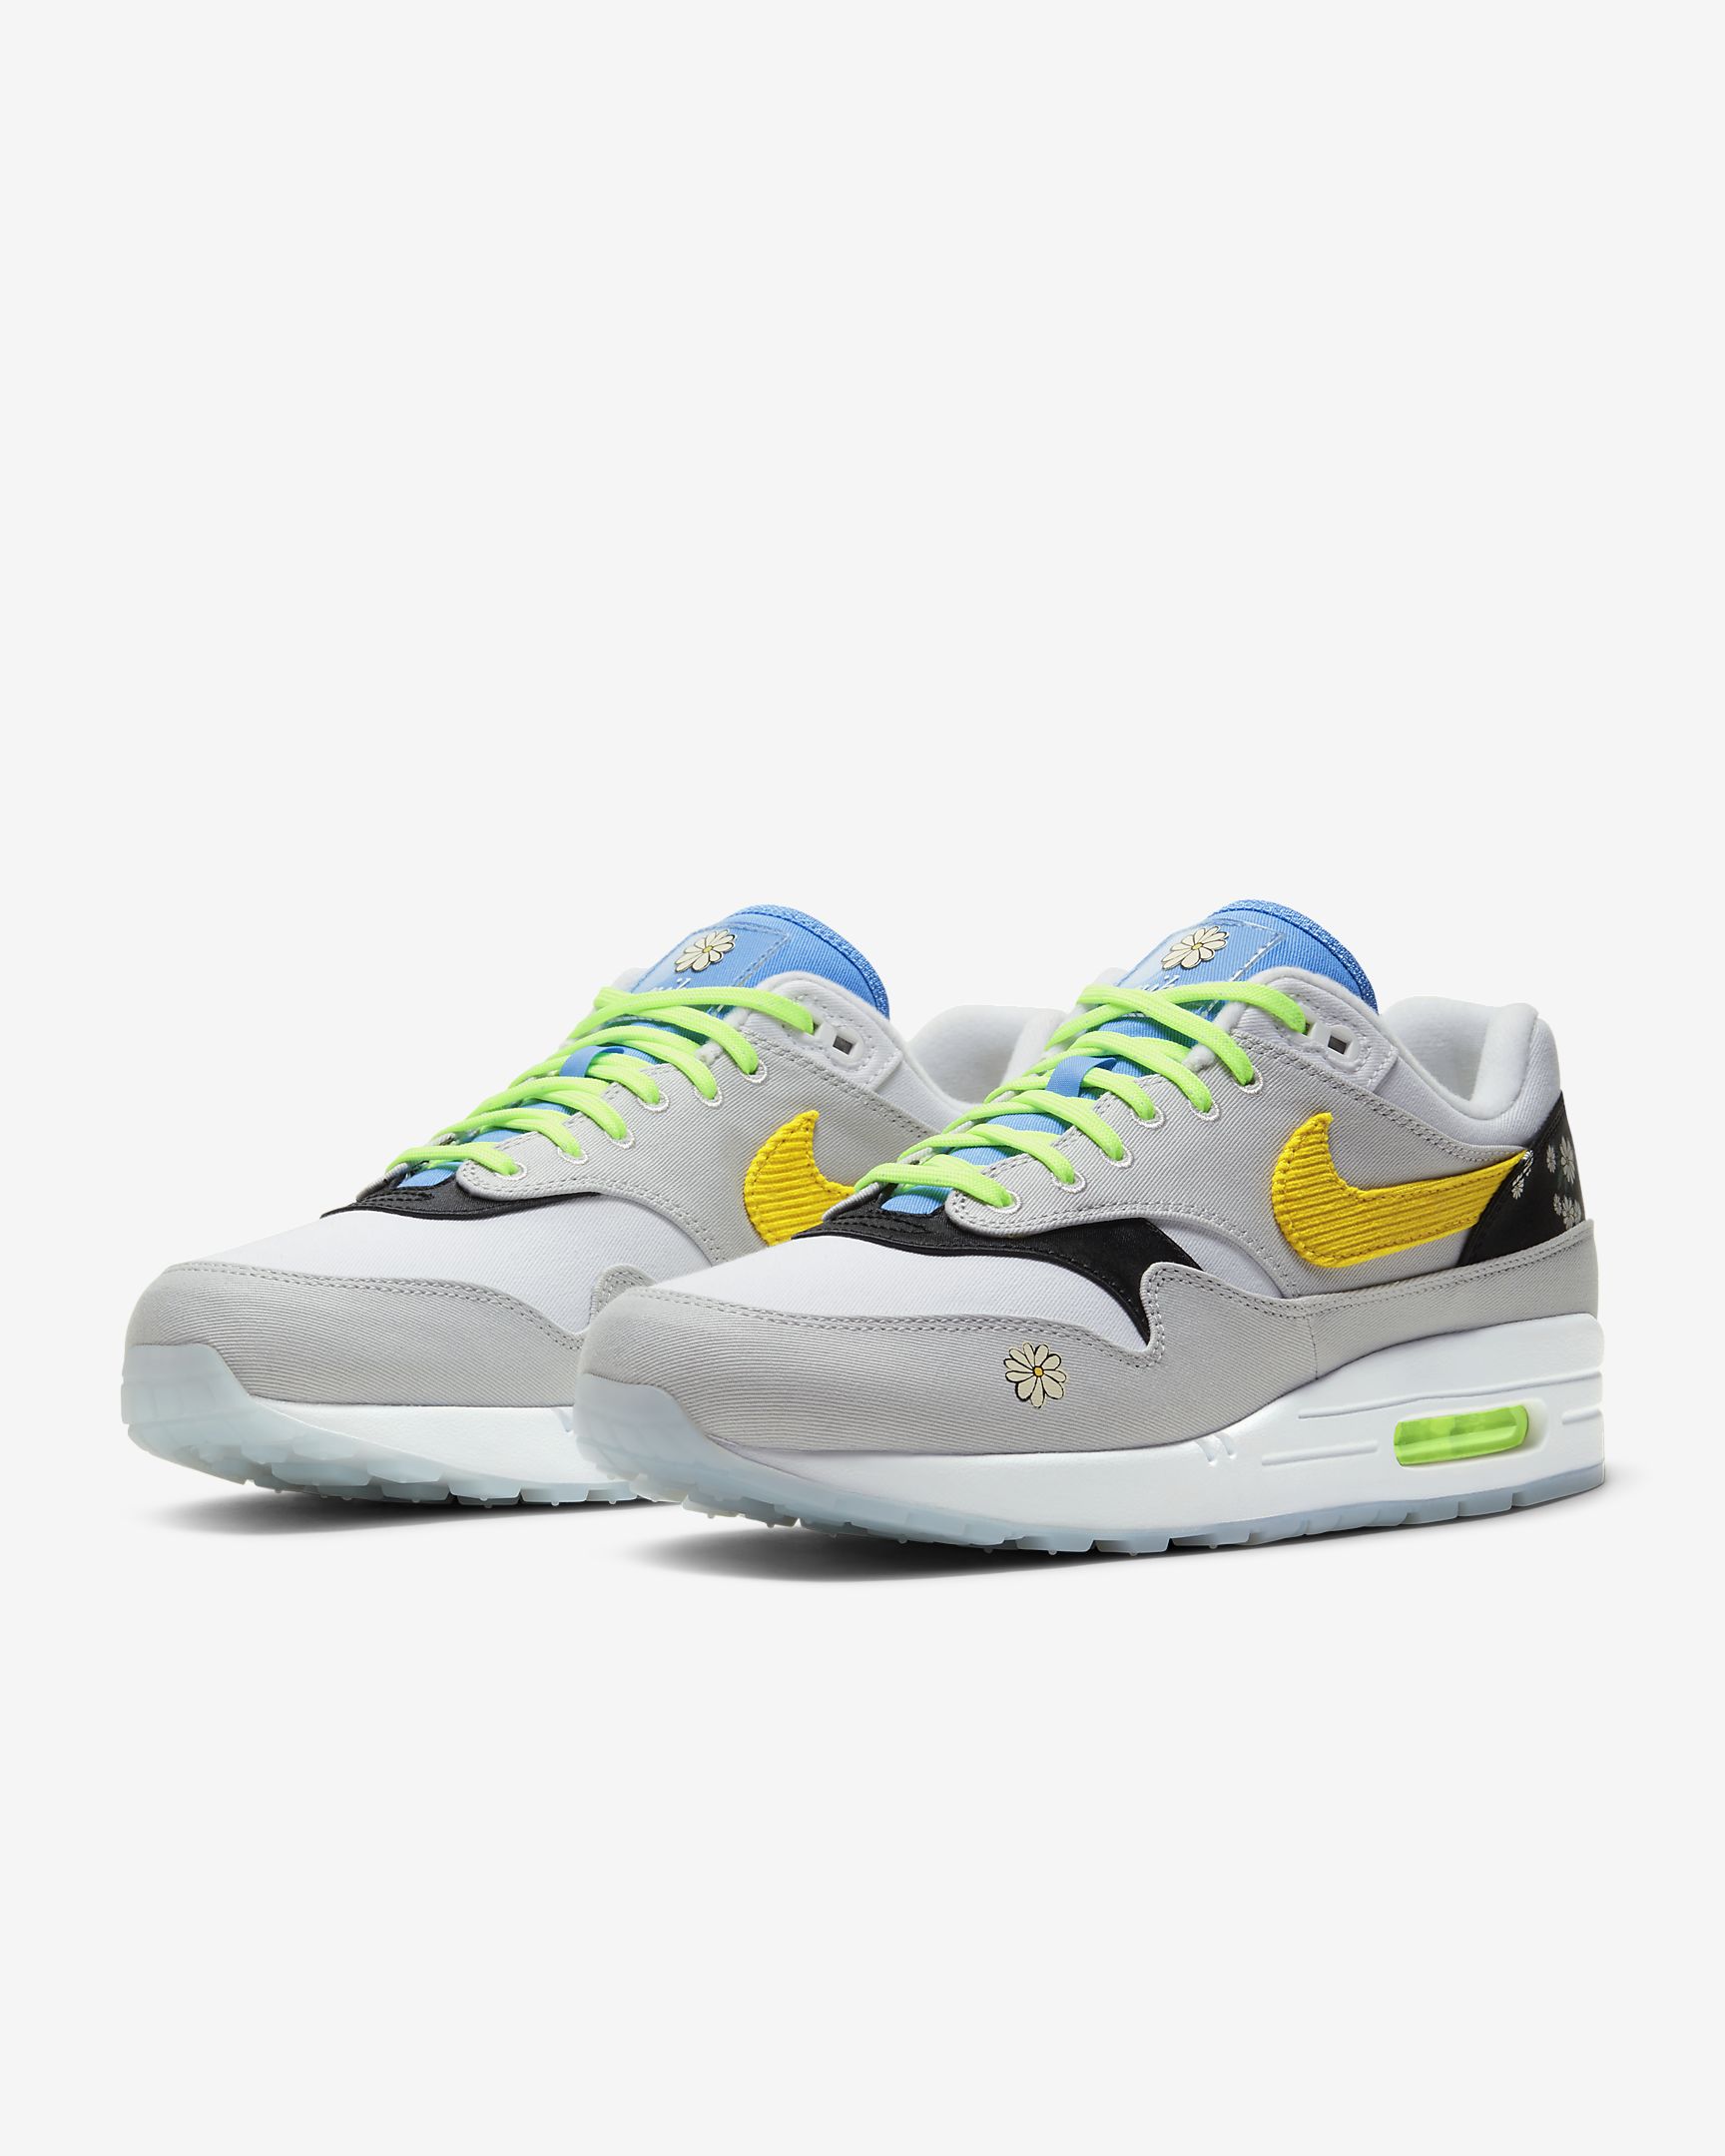 air max 1 new releases 2020